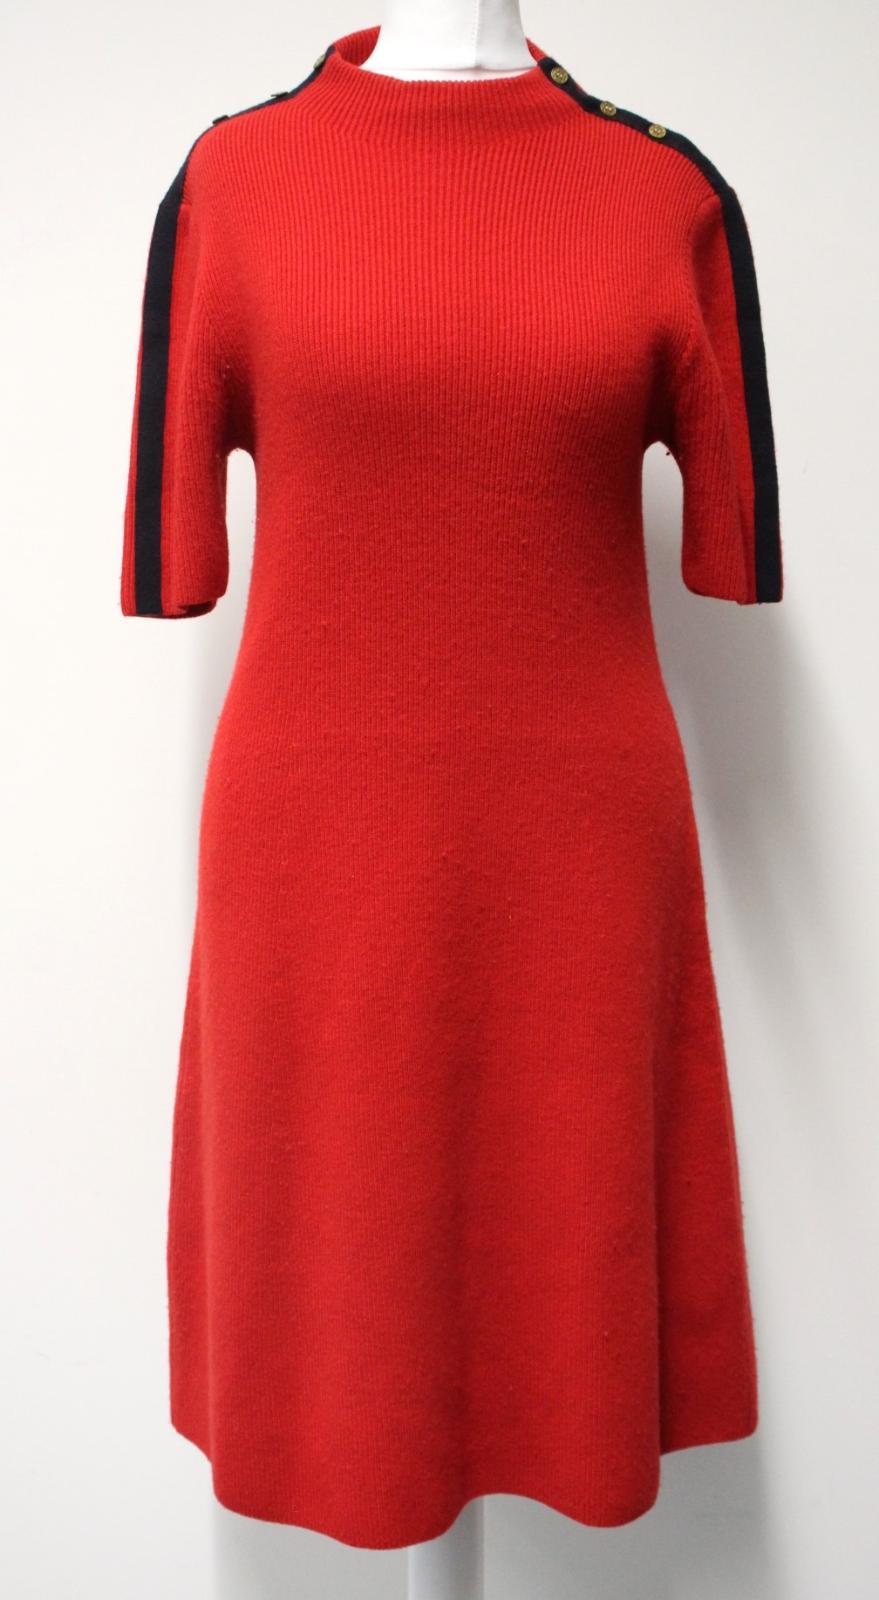 TORY BURCH Ladies Red Ribbed Knit Merino Wool Knee Length Jumper Dress Approx S